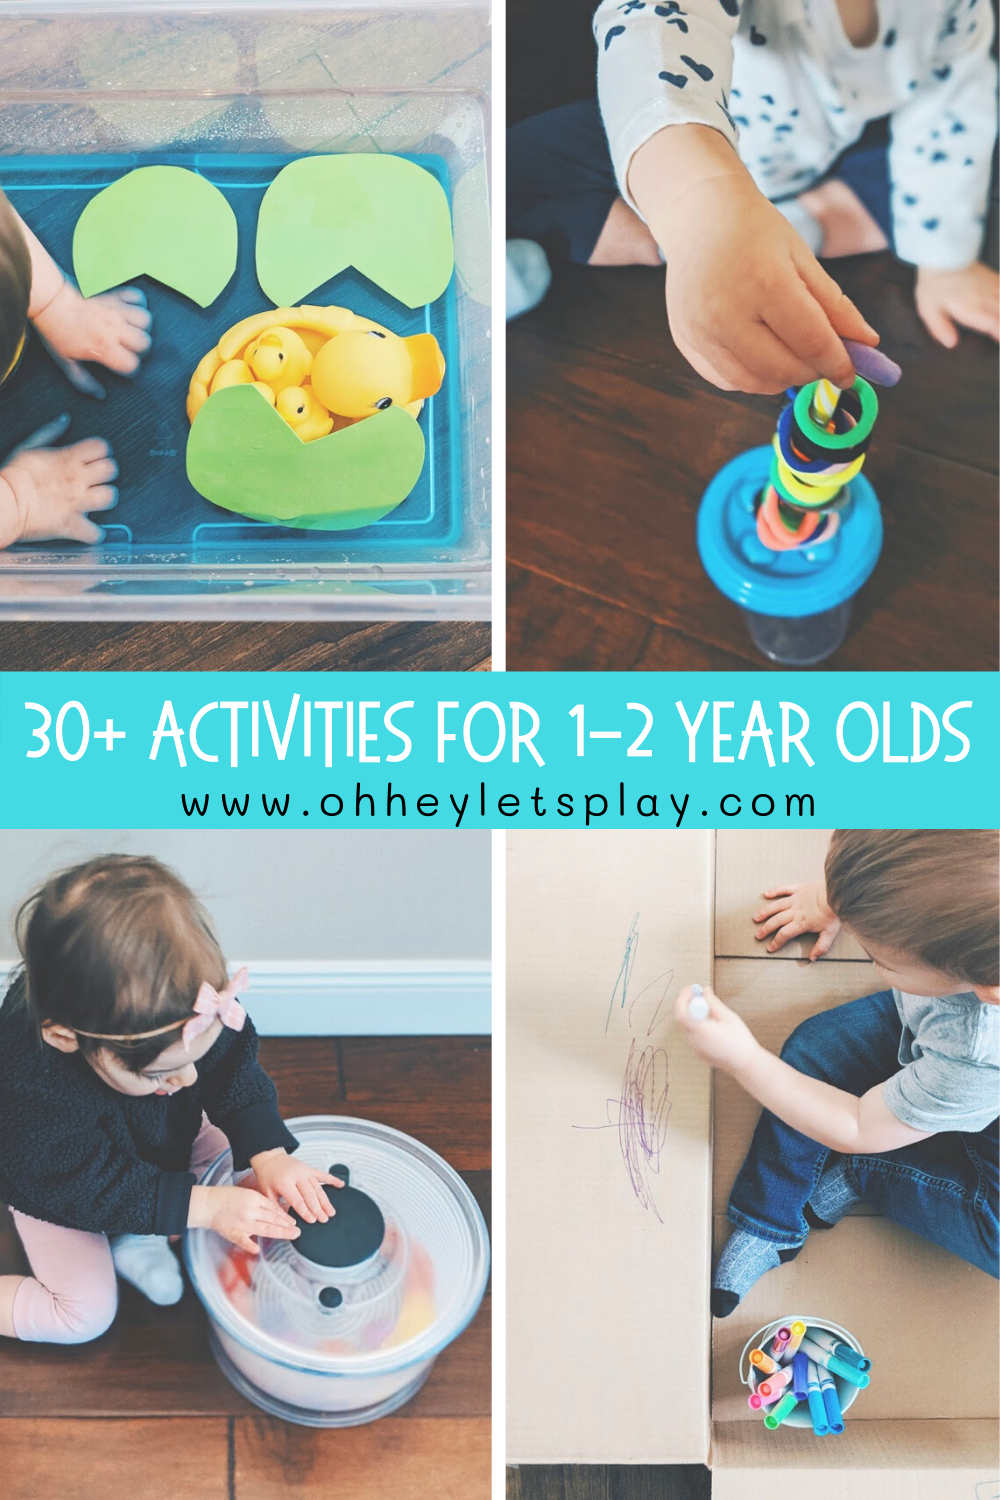 30+ Activities for 1-2 Year Old Toddlers - Oh Hey Let's Play www.ohheyletsplay.com.png